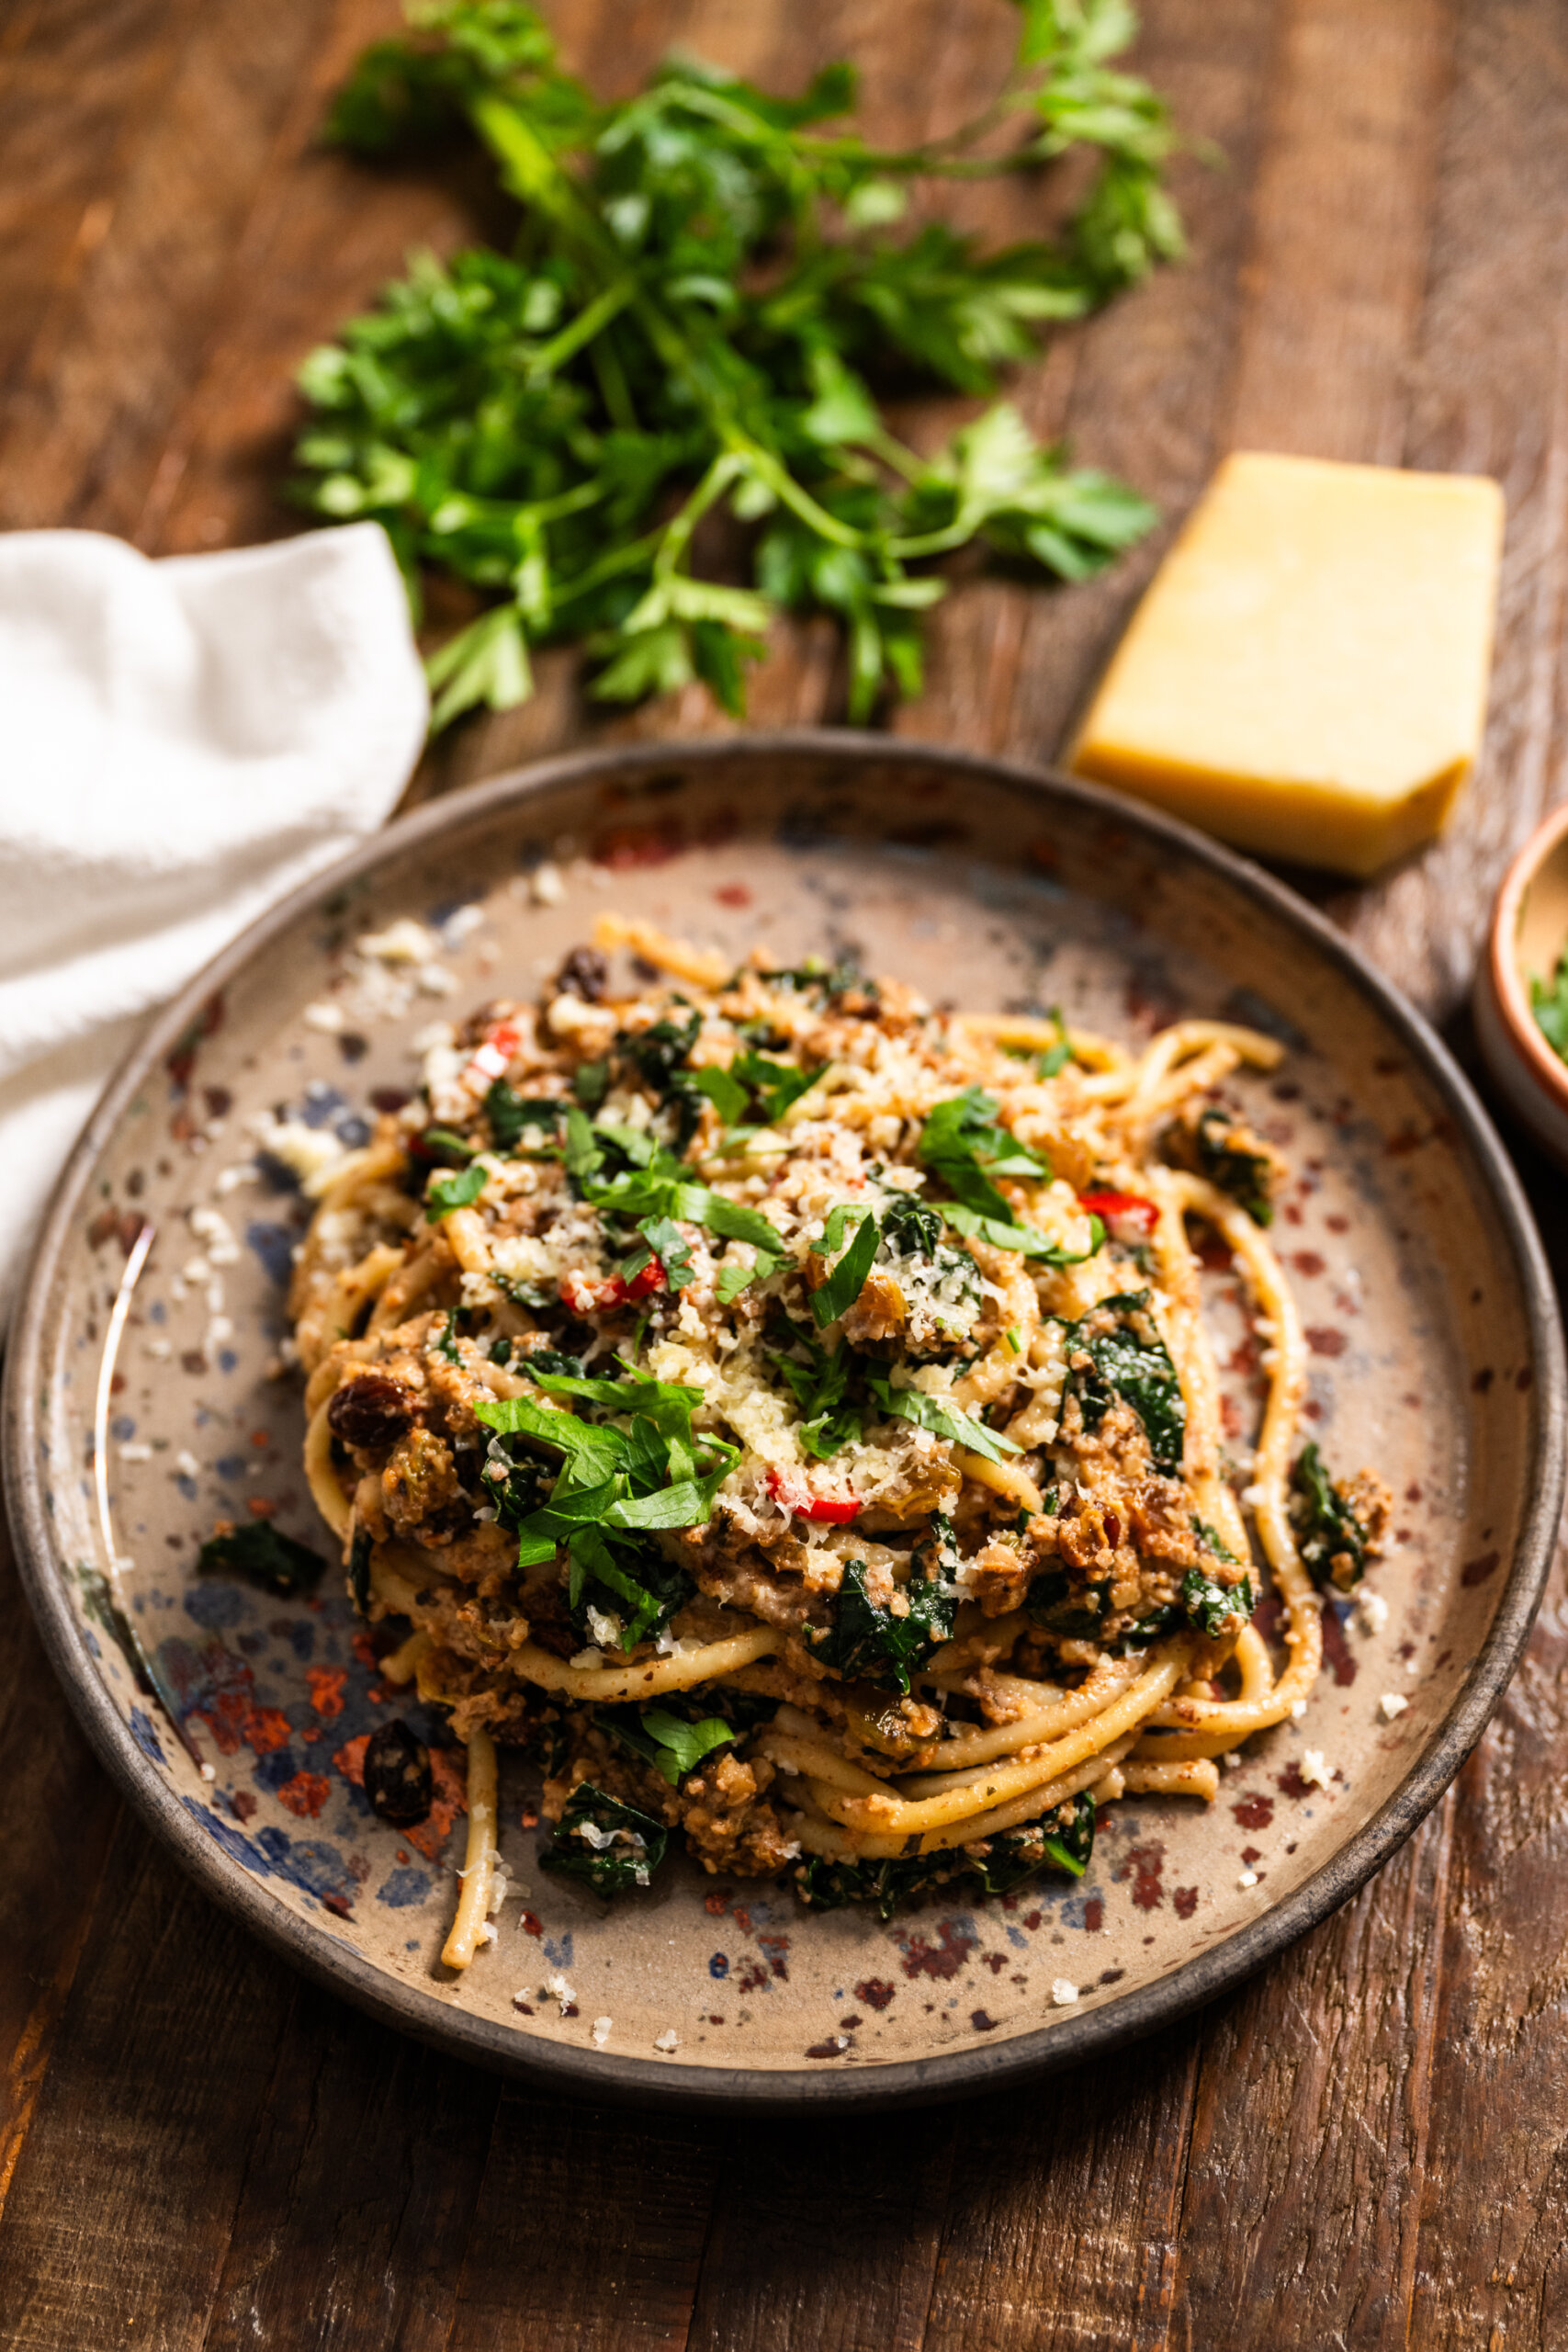 Pasta foriana - toasted walnuts, pine nuts, garlic, raisins, and kale in olive oil